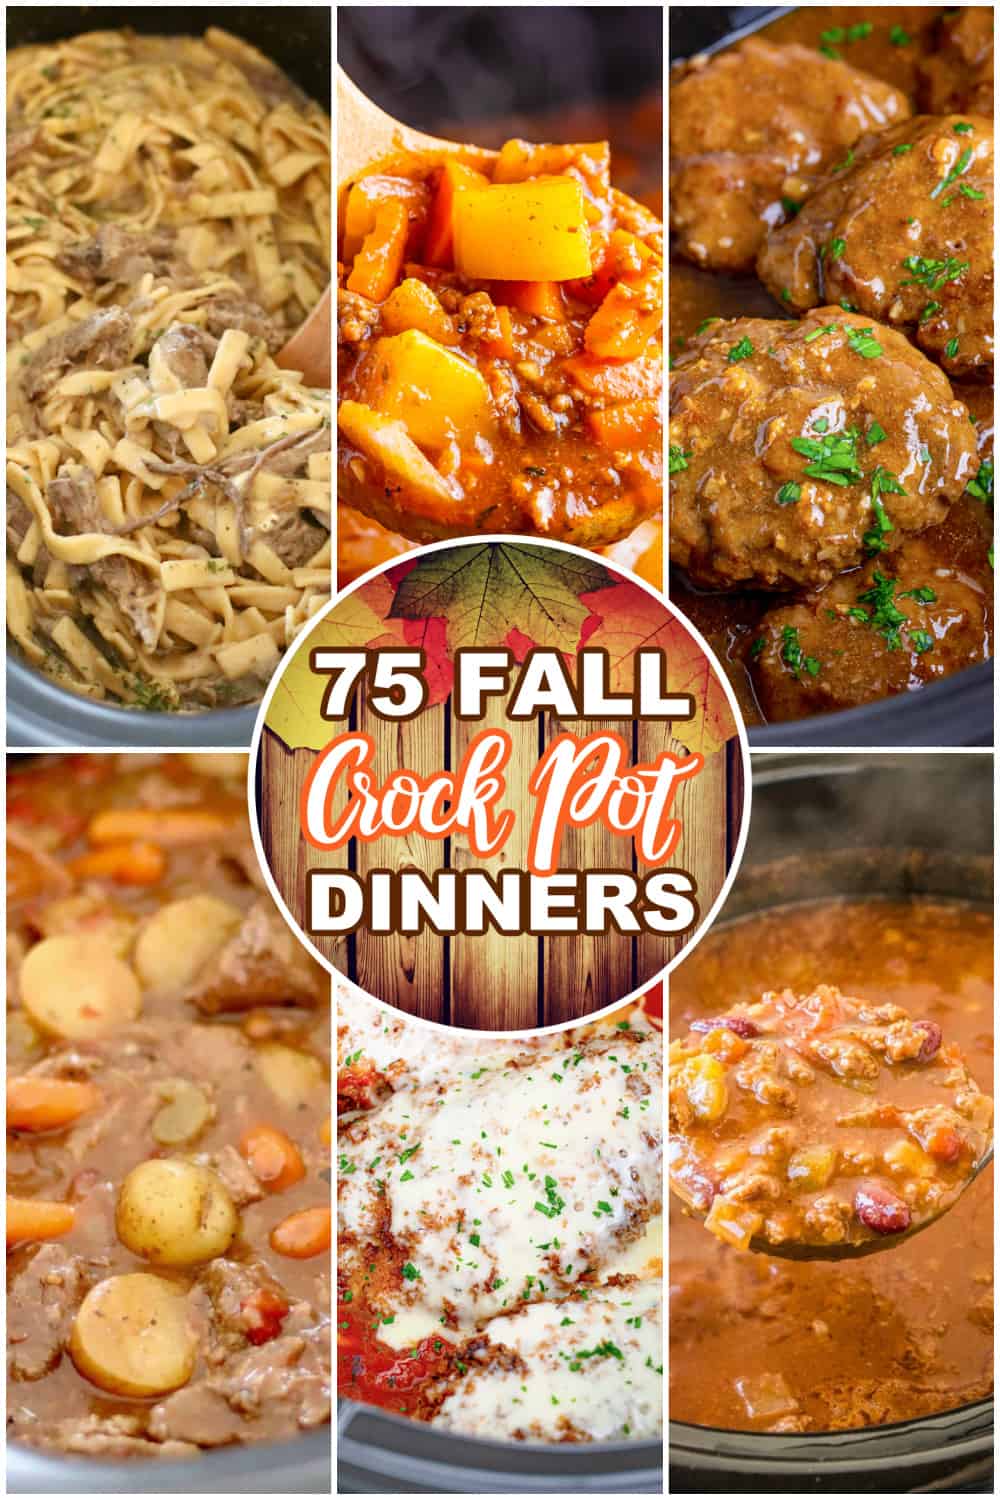 A collage of 6 crock pot meals with a headline text that says "75 Fall Crock Pot Dinners".